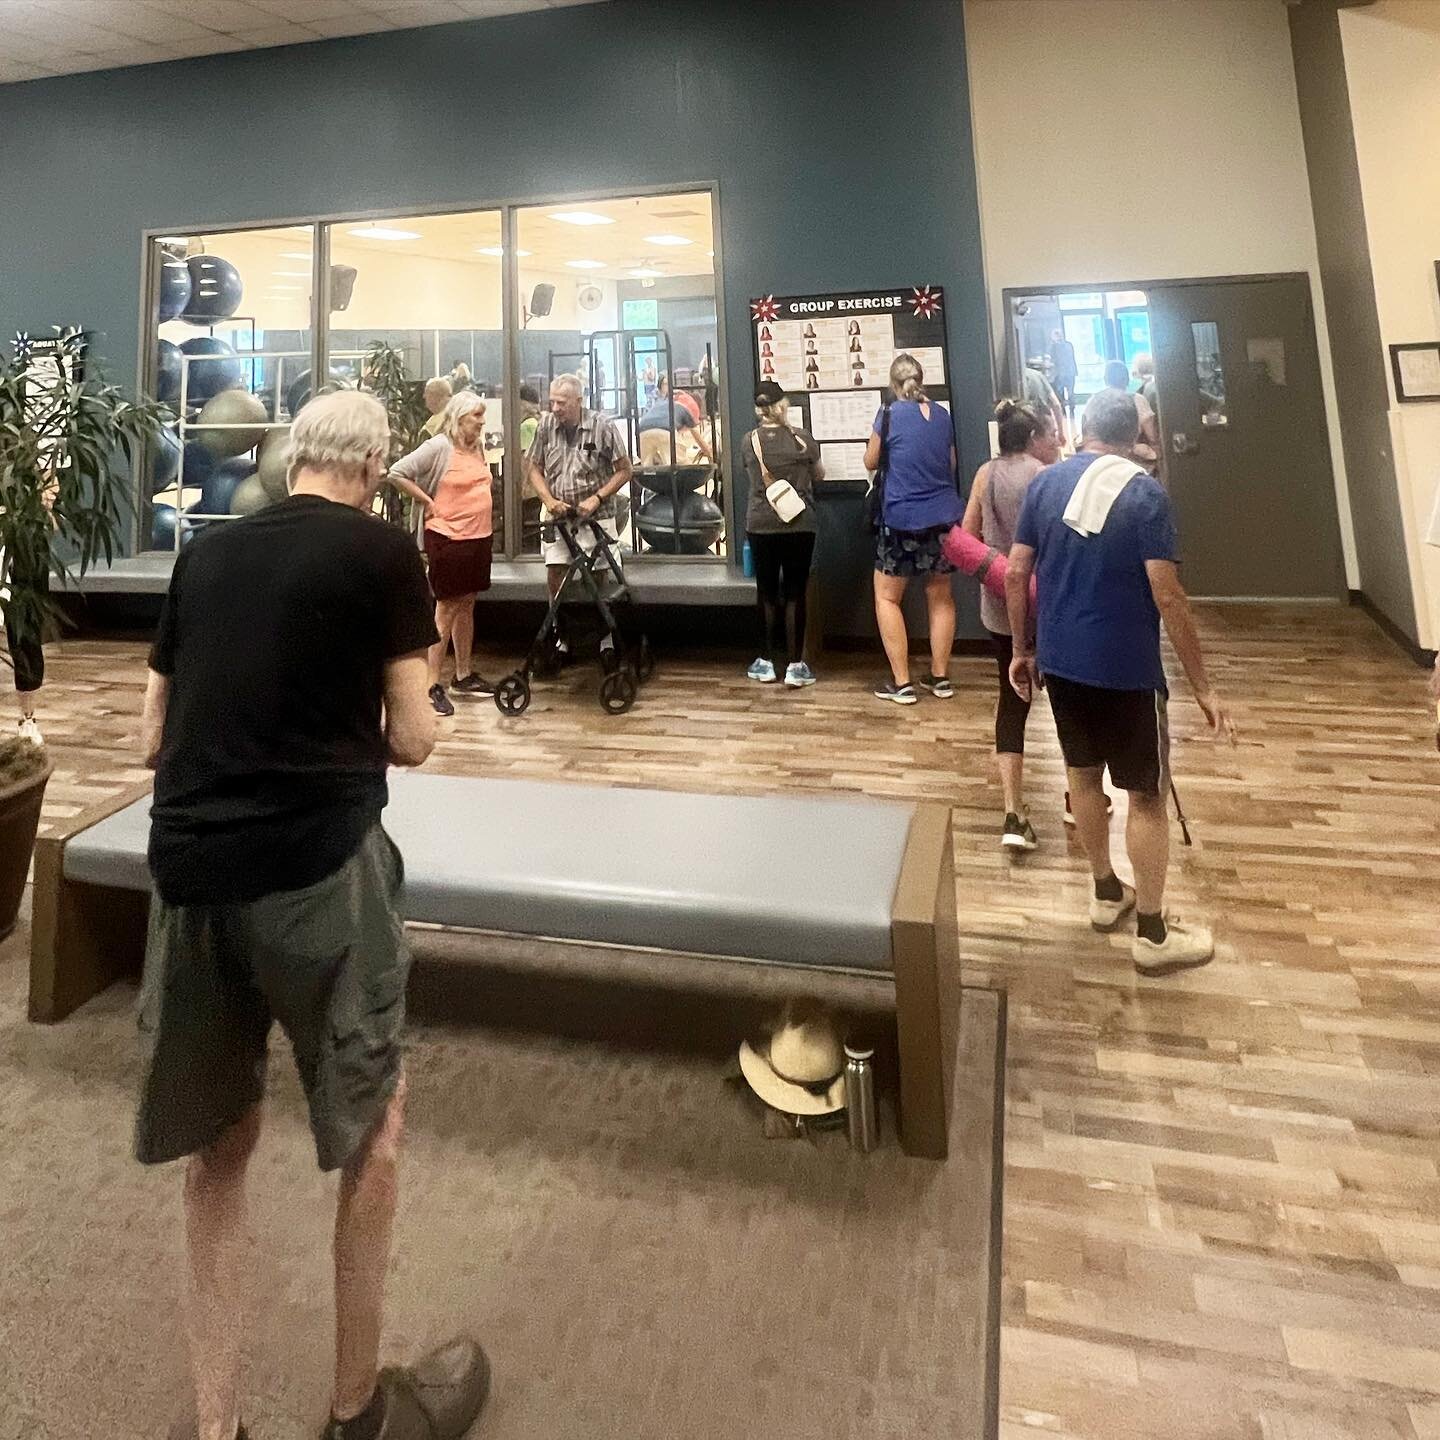 We absolutely LOVE to see our members conversing, saying hi, and the sounds of the buzz of conversation brings us so much joy. 

See you soon at Chico Sports Club 👍🏻

#chicosportsclub #chicoca #chicogyms #gymlife